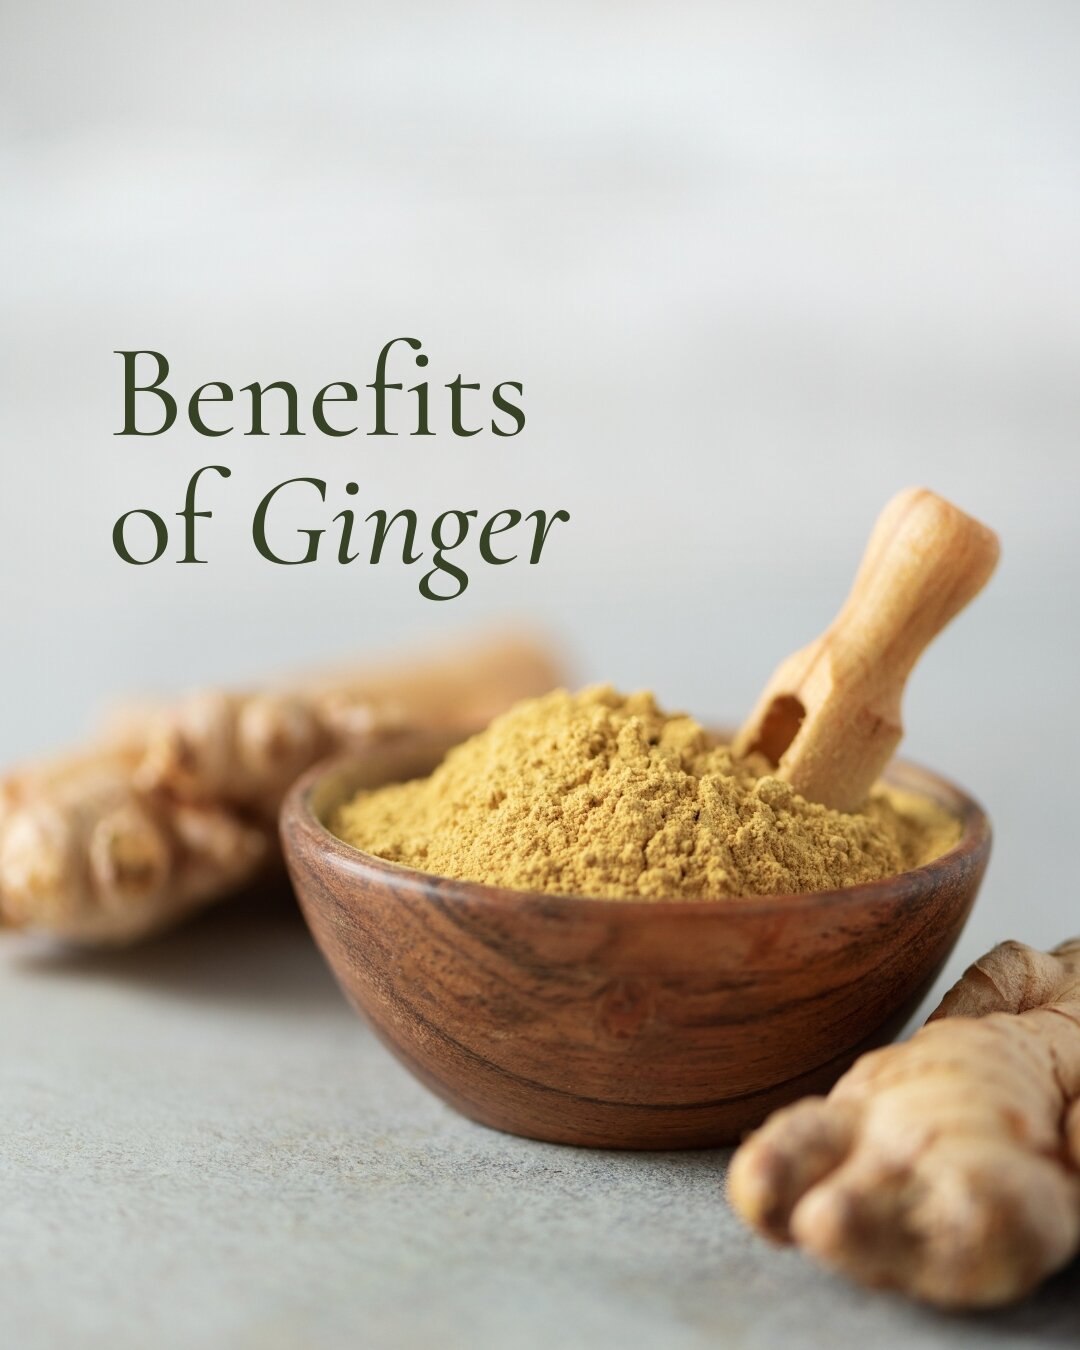 Ginger has many benefits including warming your body. When you feel a cold or flu coming on, a tonic of freshly grated ginger in hot water can help tremendously. 

I like mine with lemon and honey which also brings in vitamin c and antiviral benefits